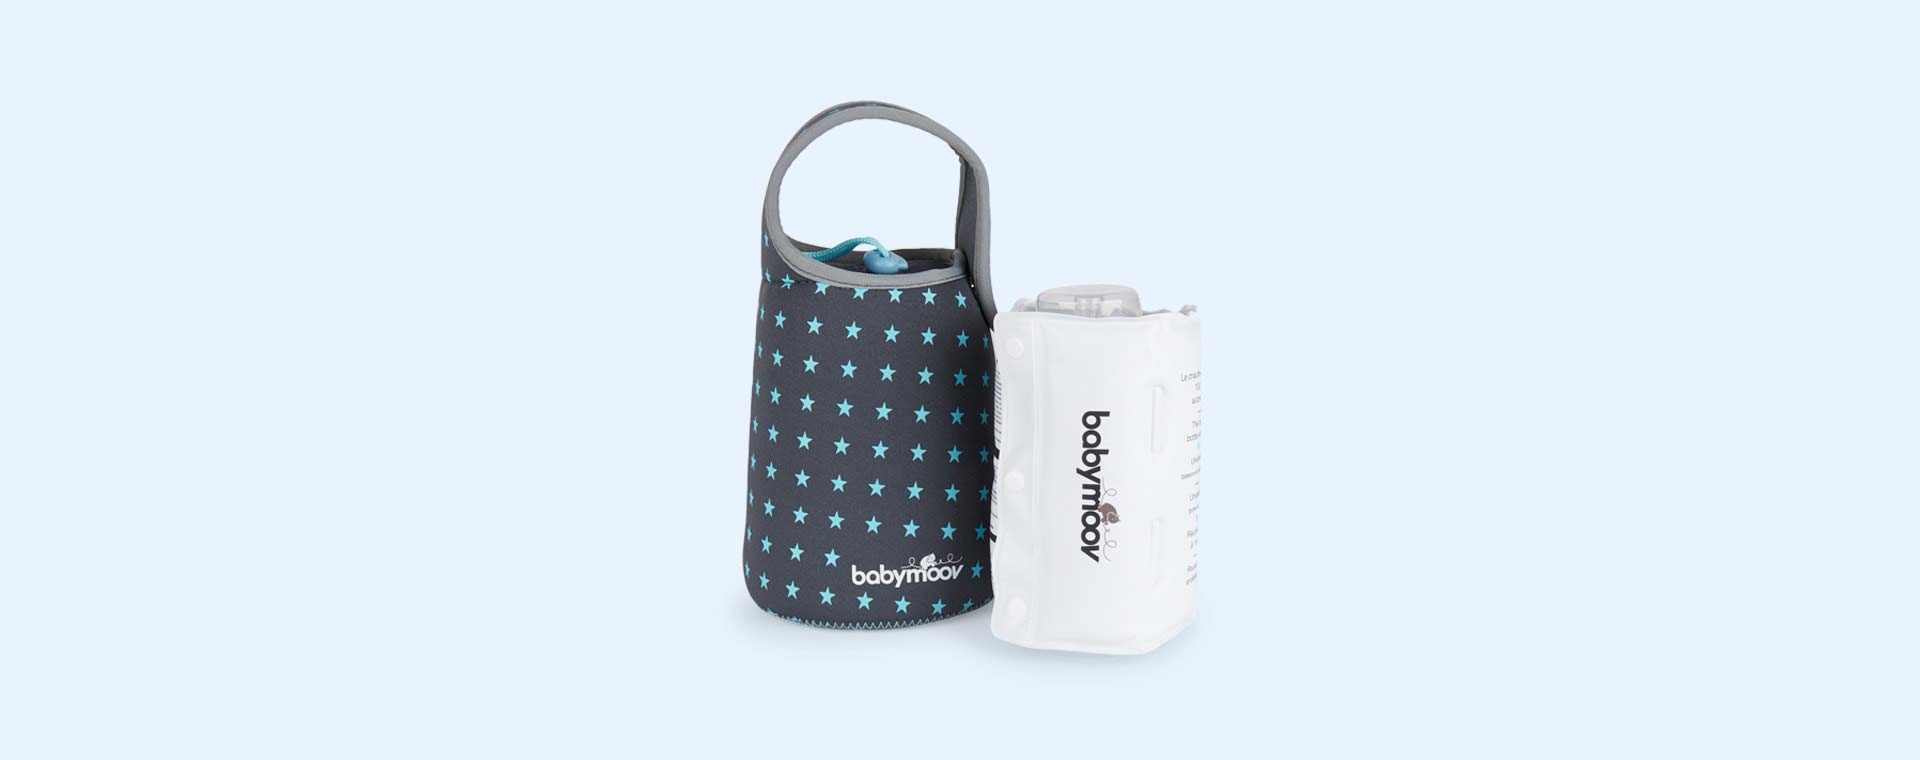 Buy the Babymoov Travel Bottle Warmer. Tried & Tested by